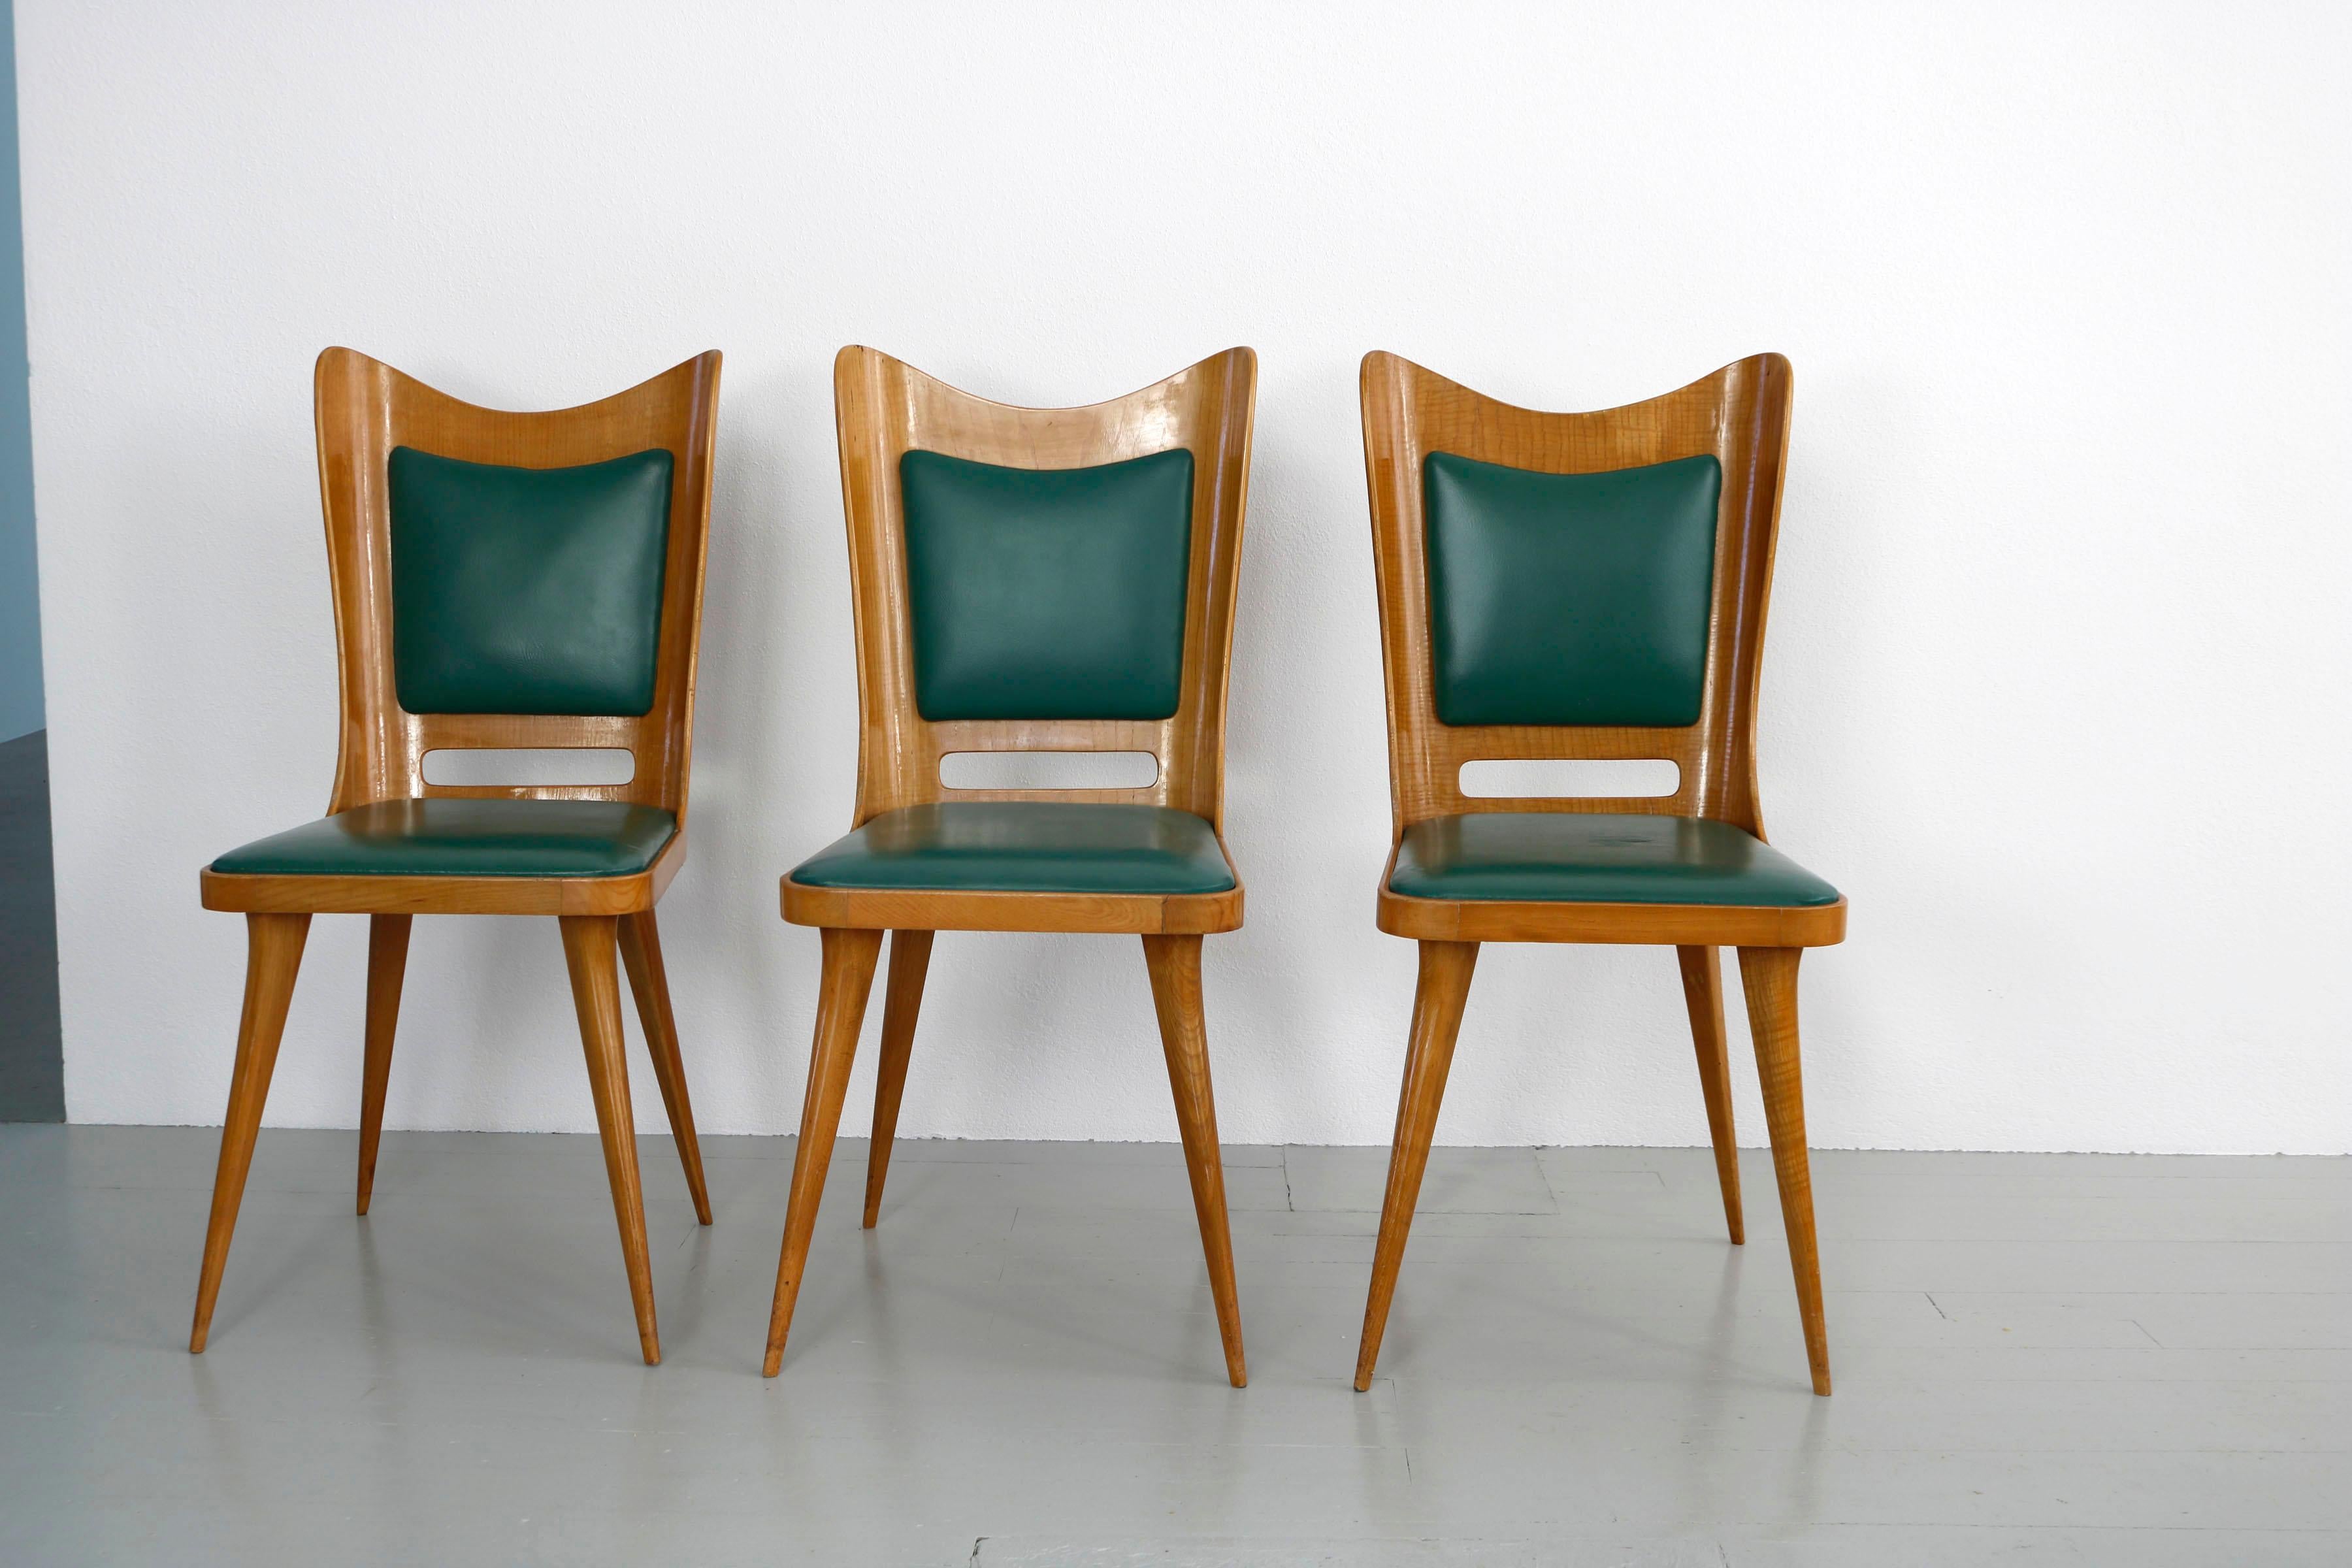 Set of Six Italian Wooden Dining Chairs with Green Upholstery, 1950 For Sale 9